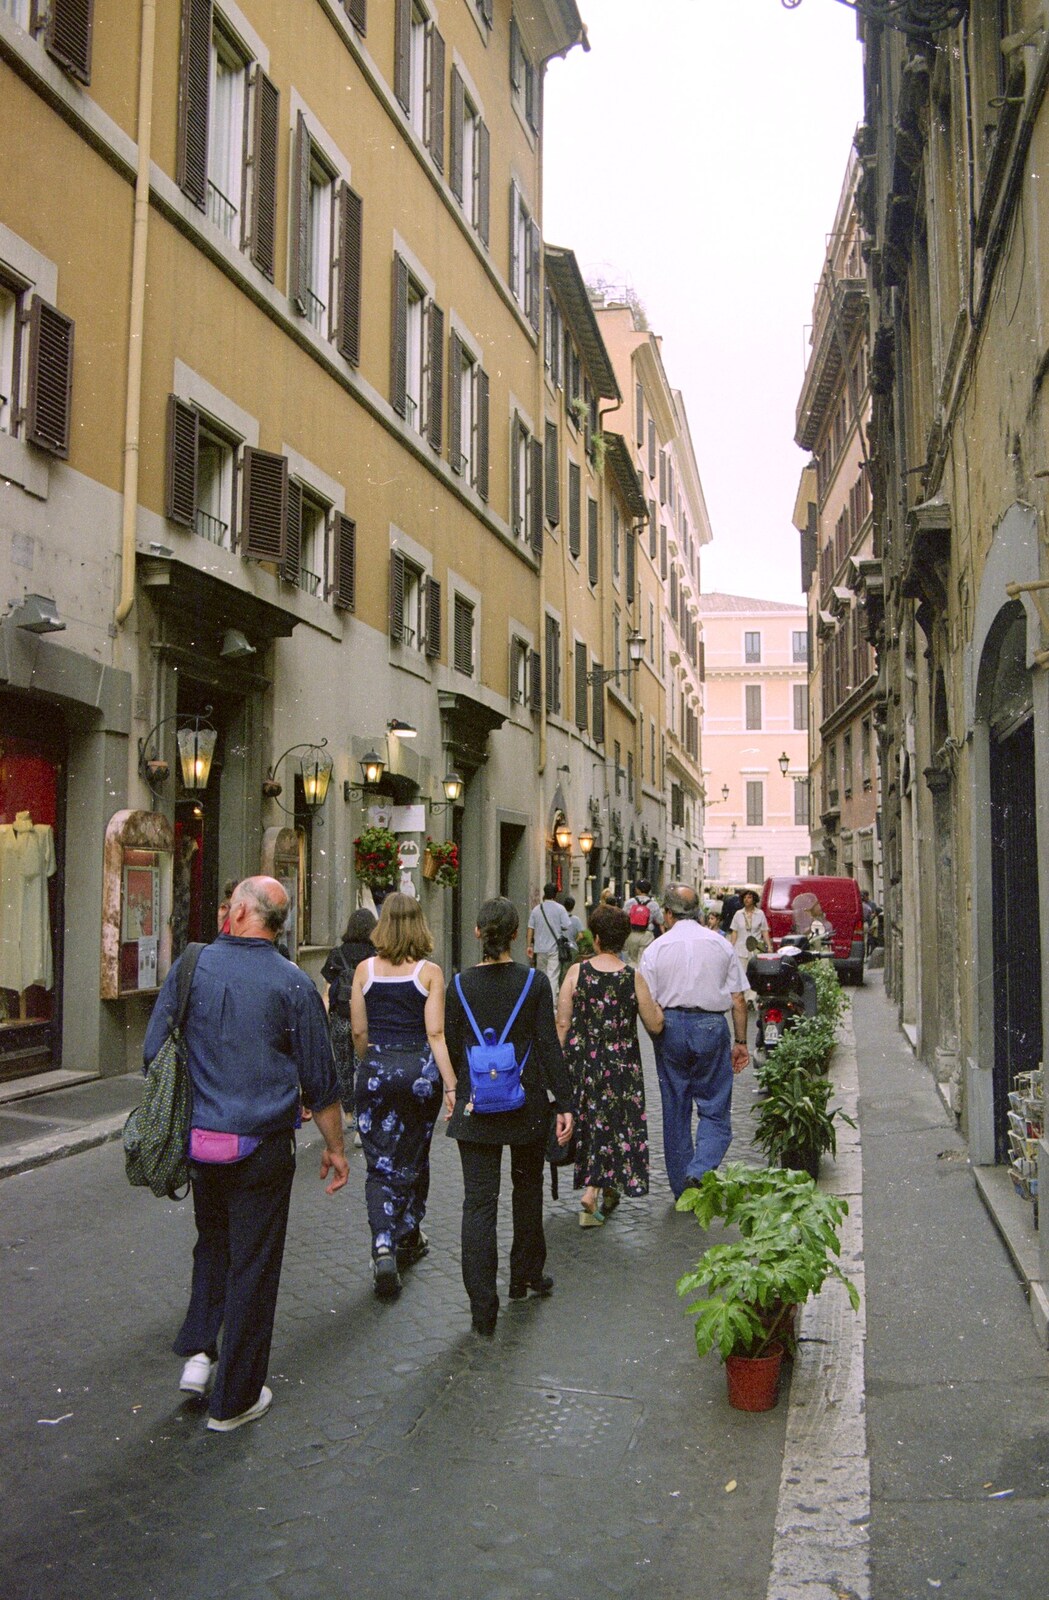 A Roman side street from A Working Trip to Rome, Italy - 10th September 1999